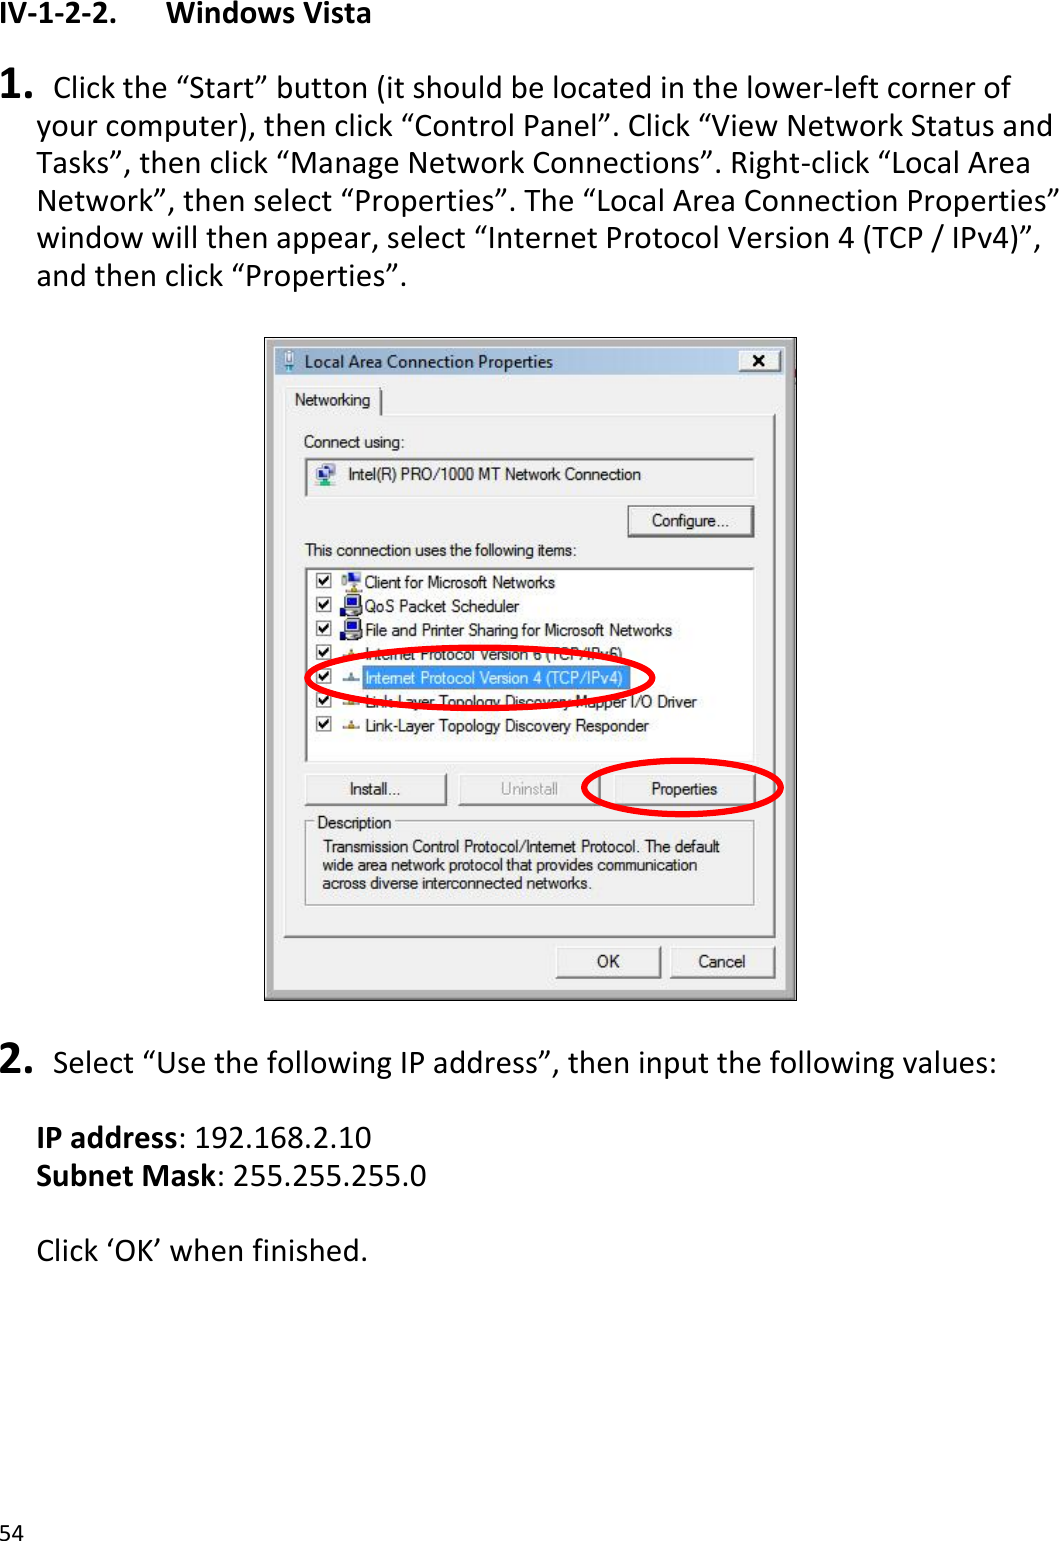 54  IV-1-2-2.    Windows Vista  1.  Click the “Start” button (it should be located in the lower-left corner of your computer), then click “Control Panel”. Click “View Network Status and Tasks”, then click “Manage Network Connections”. Right-click “Local Area Network”, then select “Properties”. The “Local Area Connection Properties” window will then appear, select “Internet Protocol Version 4 (TCP / IPv4)”, and then click “Properties”.    2.  Select “Use the following IP address”, then input the following values:  IP address: 192.168.2.10 Subnet Mask: 255.255.255.0  Click ‘OK’ when finished.  